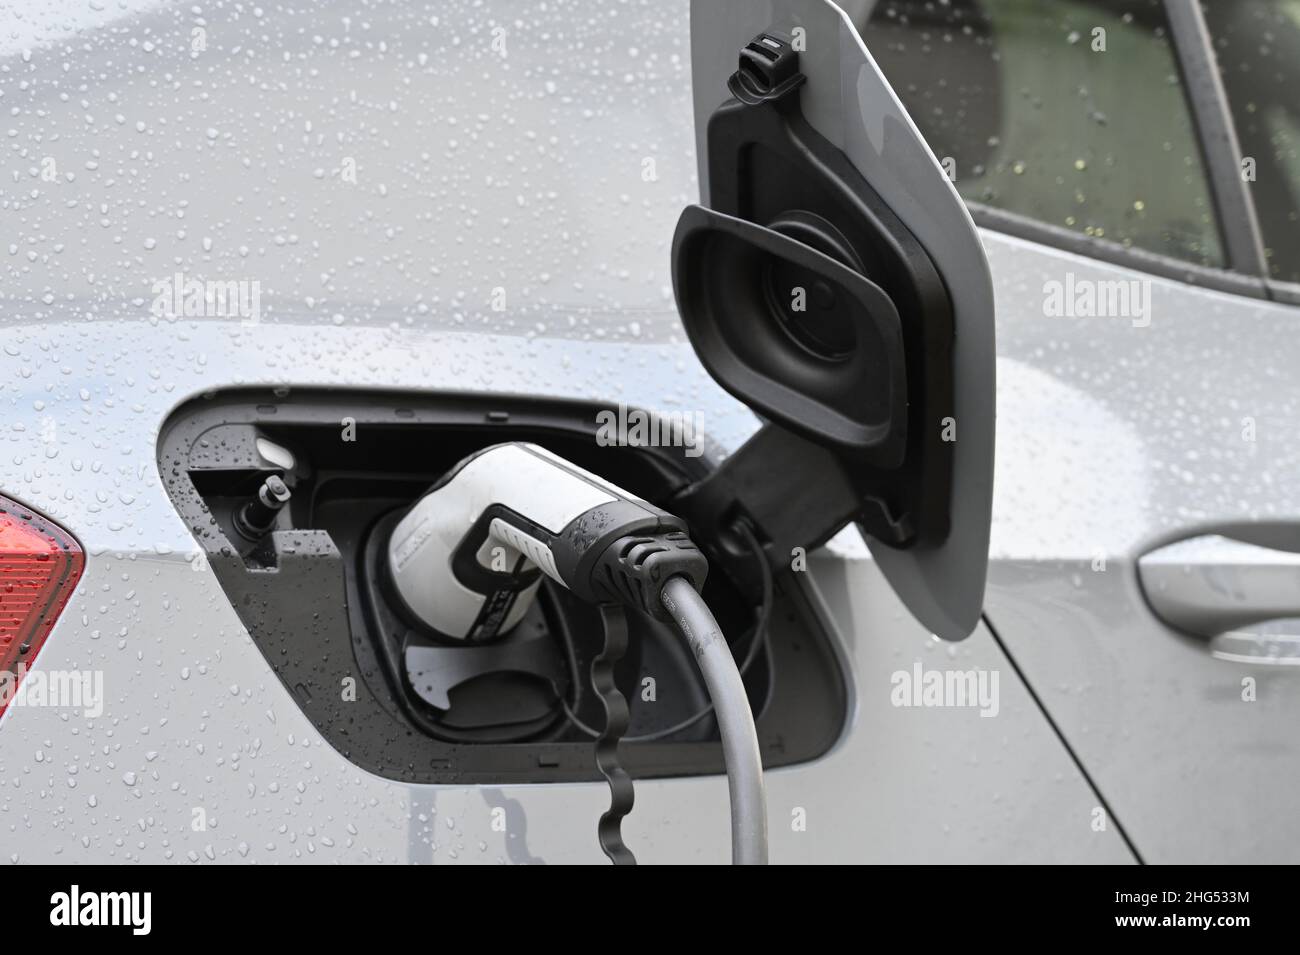 An electric car charging with its fuel flap open, in progress of charging the vehicle. Stock Photo